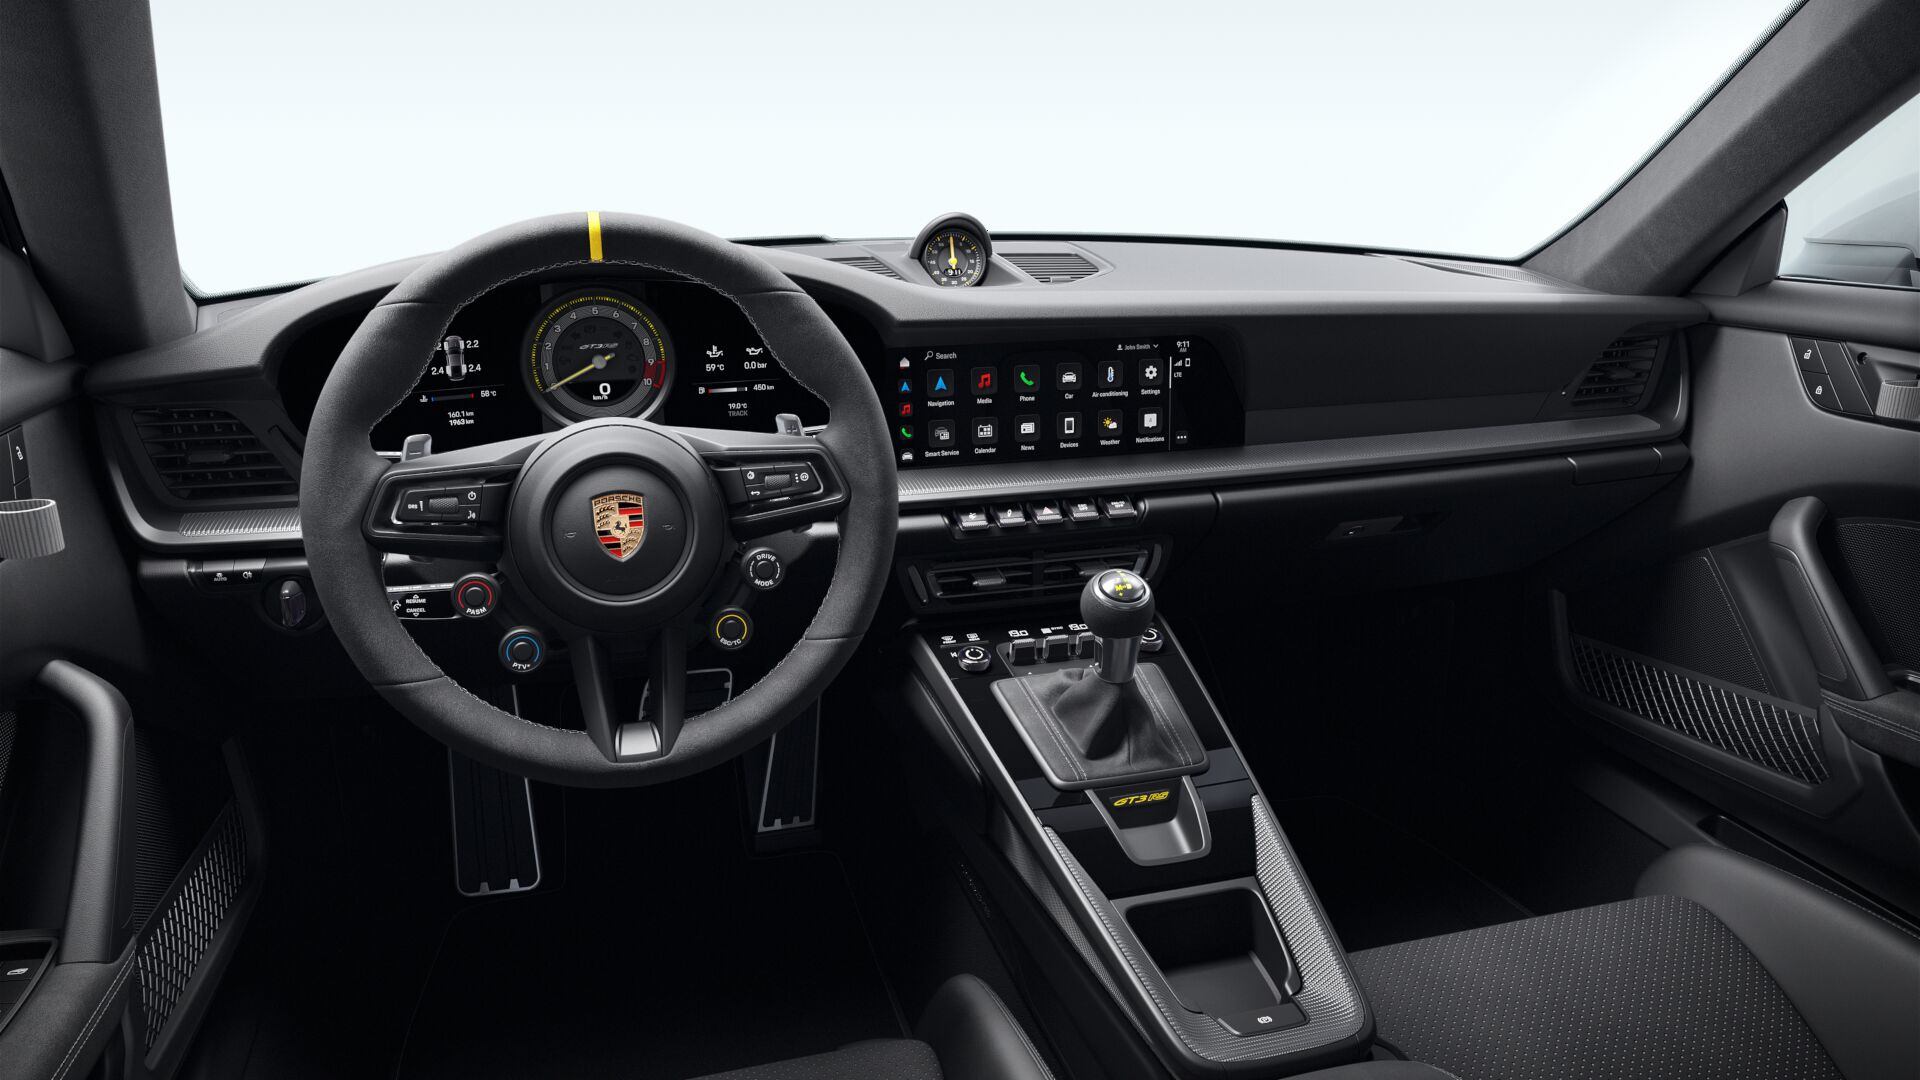 Interior view of 911 GT3 RS